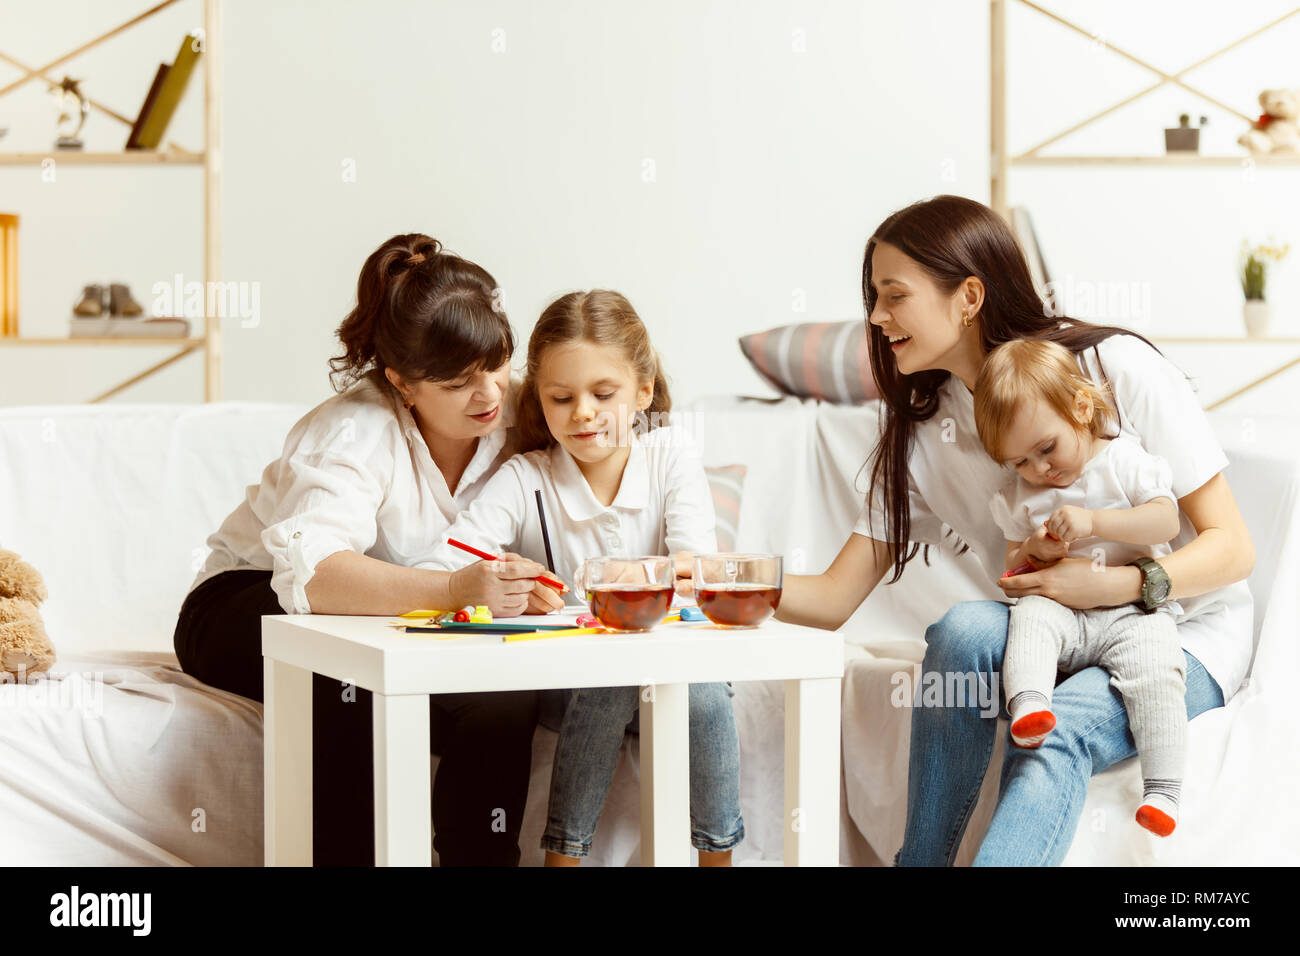 Two little girls their attractive young mother and their charming grandmother sitting on sofa and spending time together at home. Generation of women. International Women's Day. Happy Mother's Day. Stock Photo